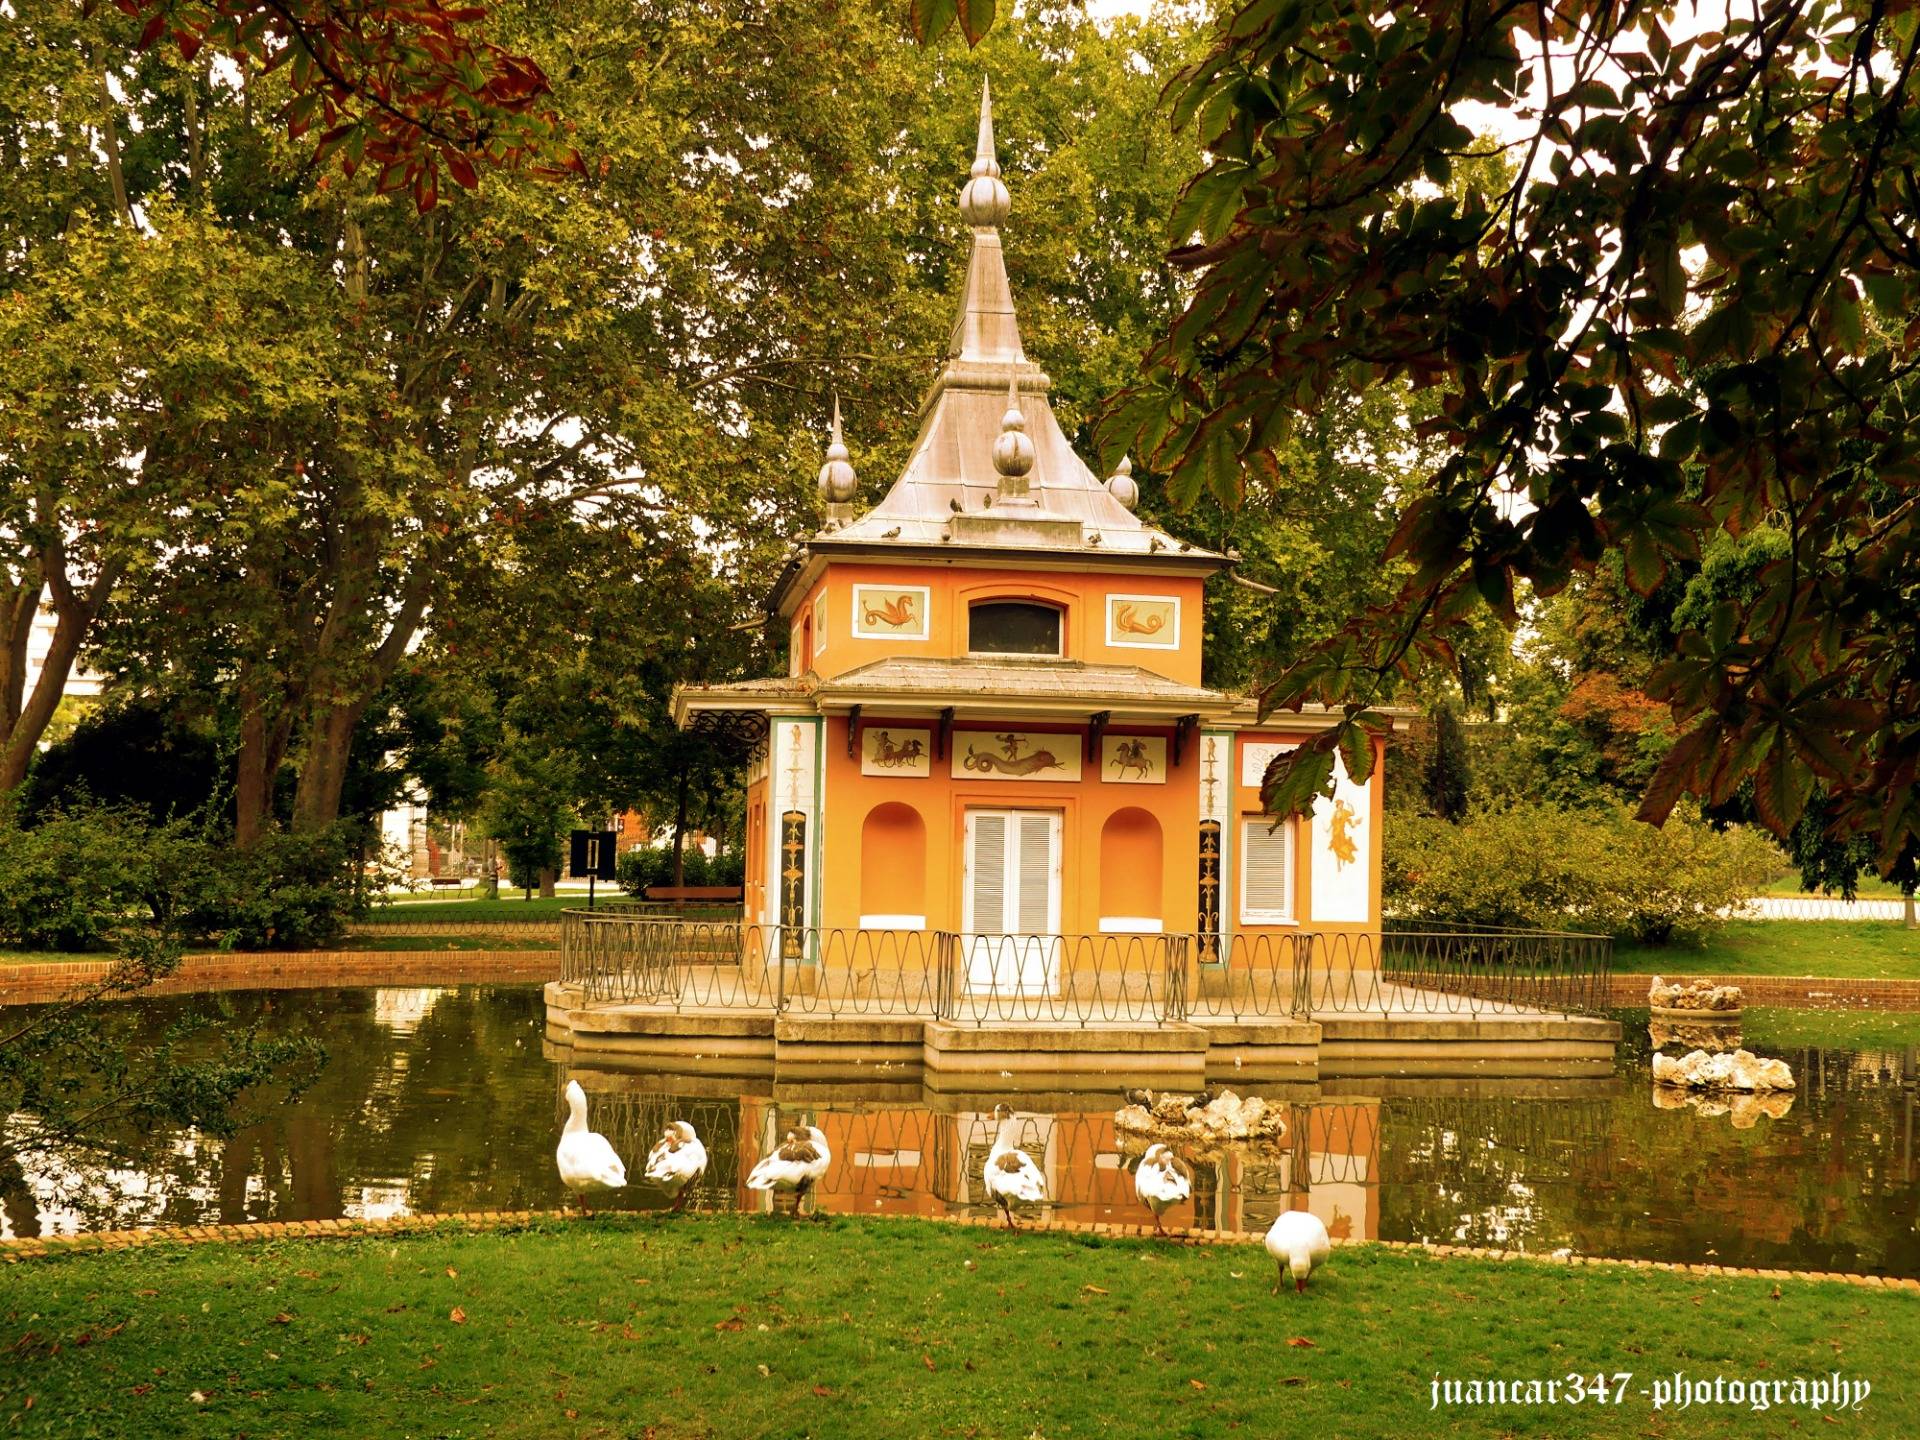 Do you know the Fisherman Little House in Madrid's Retiro Park?